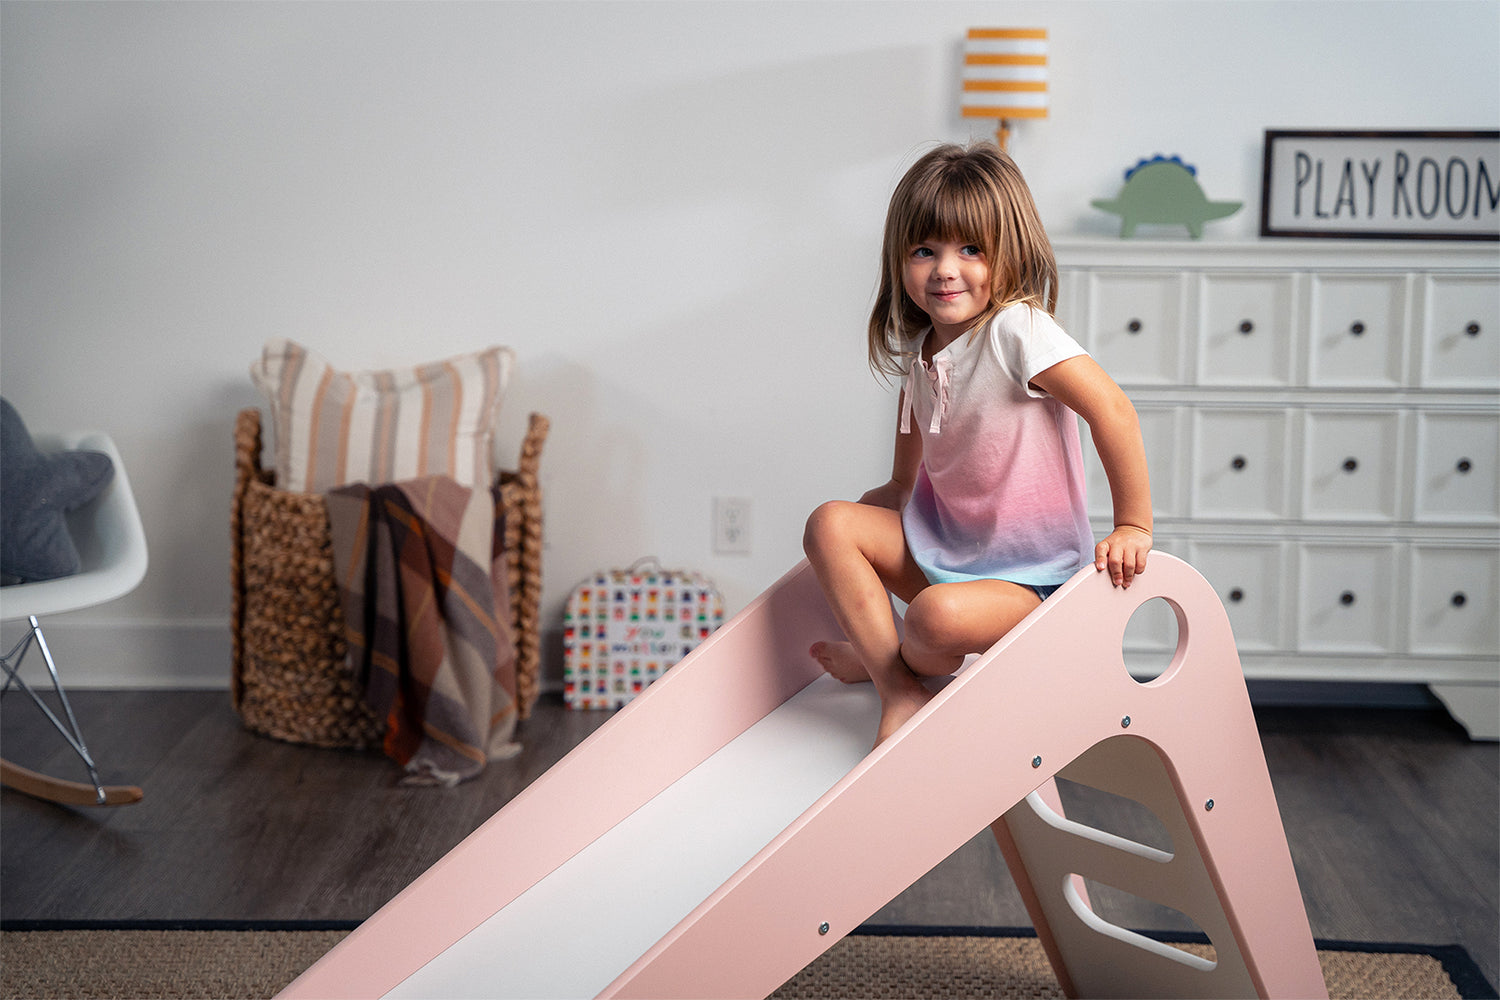 Adorable Girl Sitting on Top of Manuka - Avenlur's Safe and Fun Indoor Toddler Slide in Playroom. Shown in Pink.